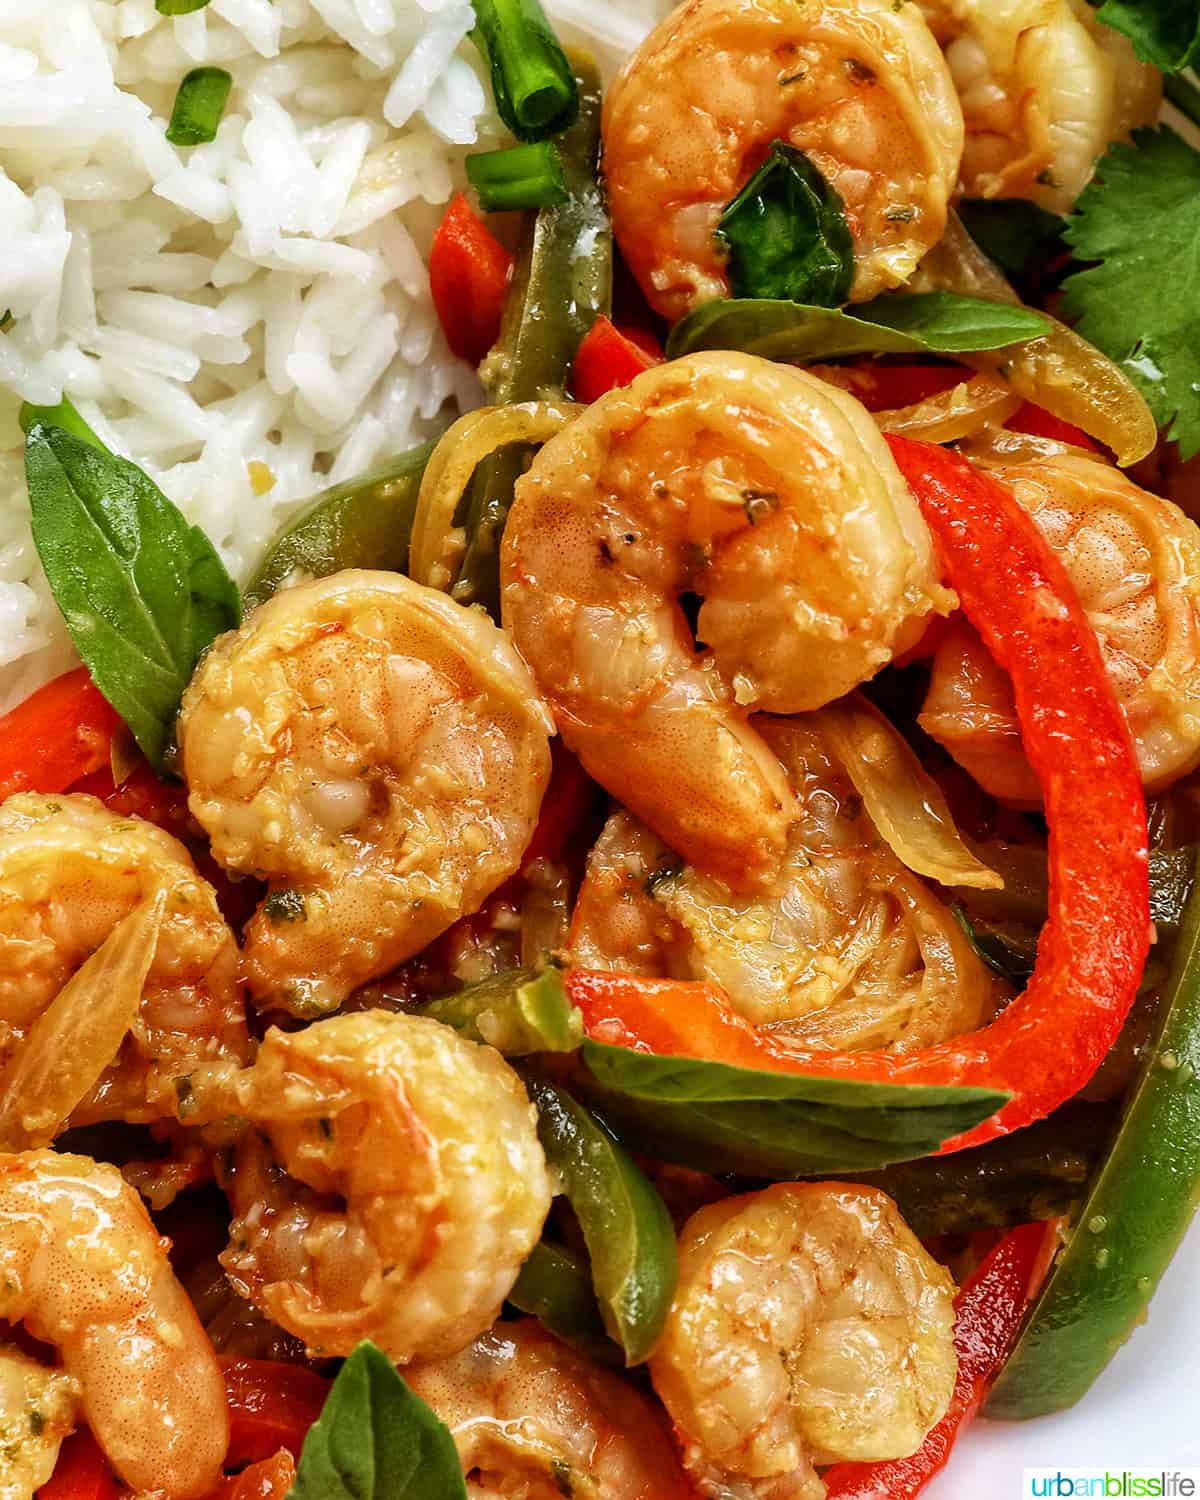 Thai Basil Shrimp with red and green peppers on a bed of rice.